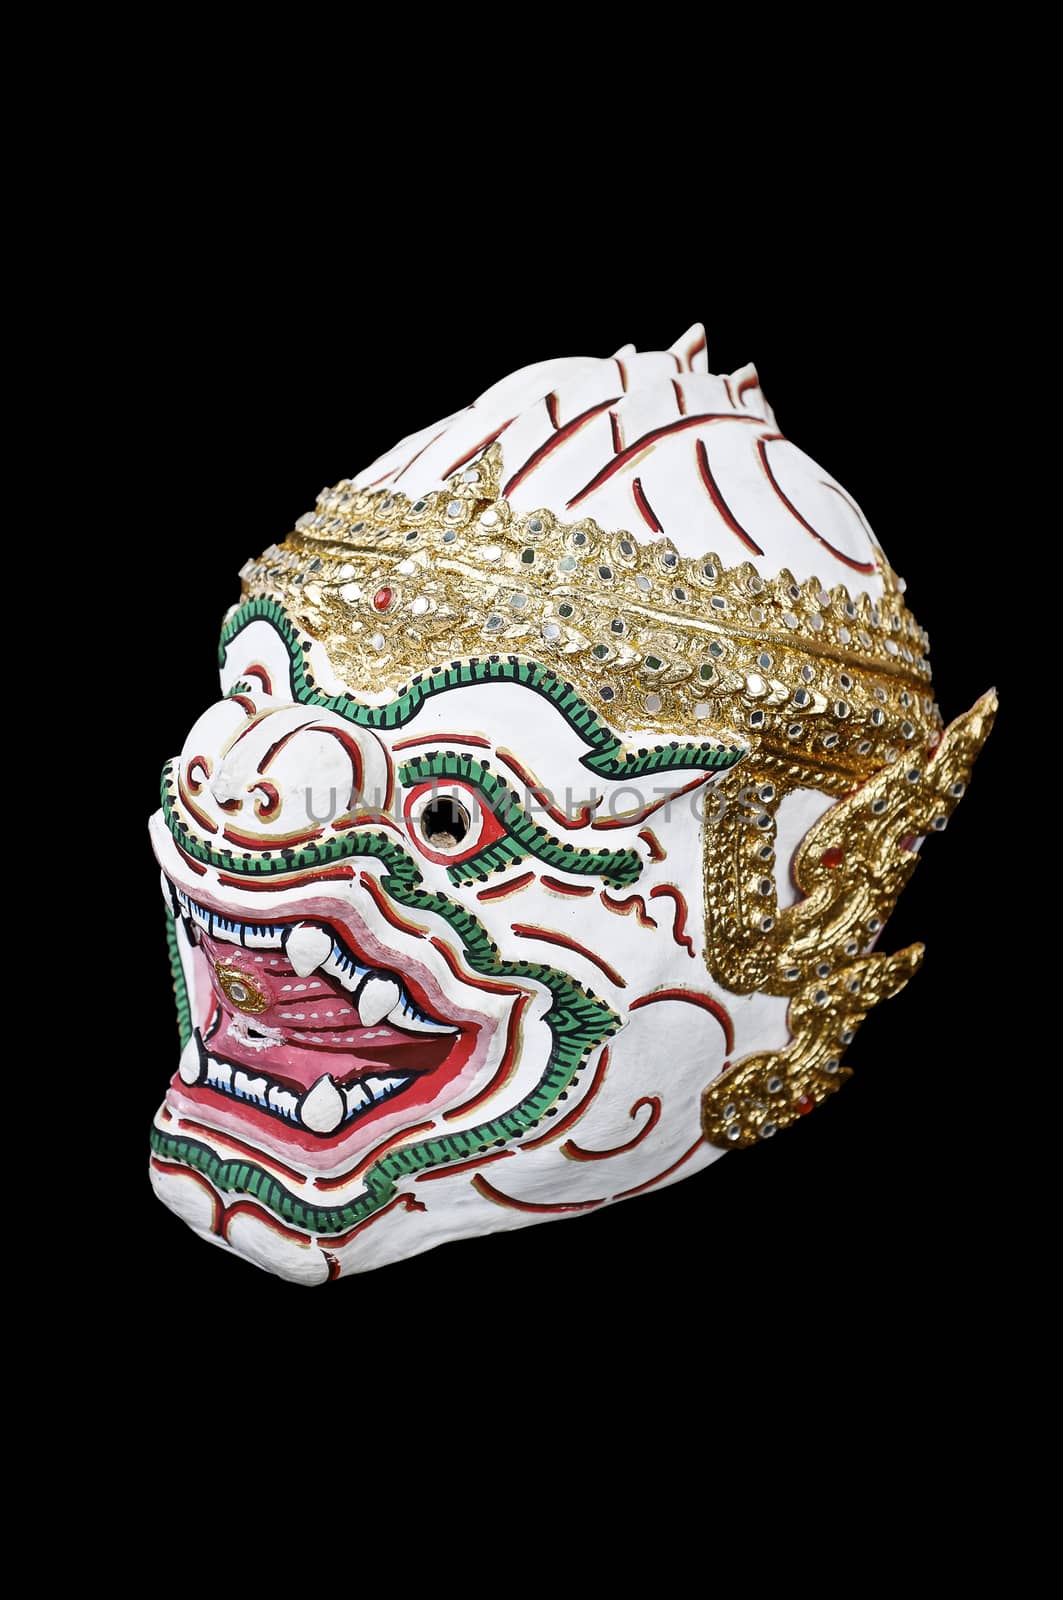 Thai traditional actor's mask, Male masked dance drama of Thailand, Hua Khon by Hepjam